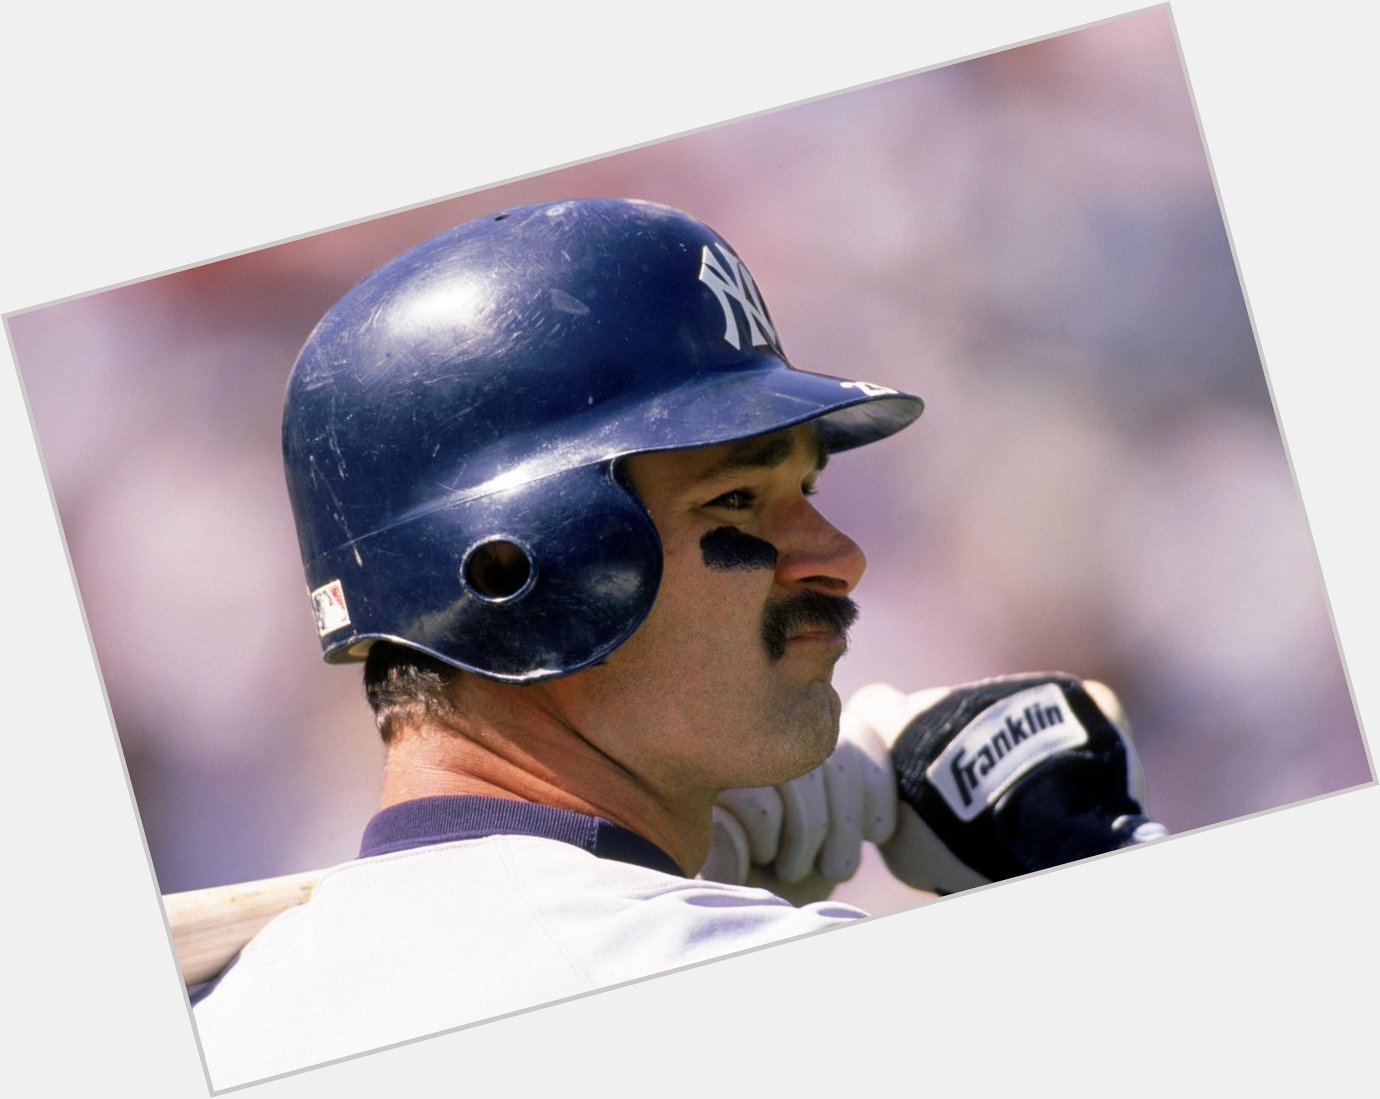 Donnie Baseball! 

Happy Birthday to Yankee great & current manager, Don Mattingly! 